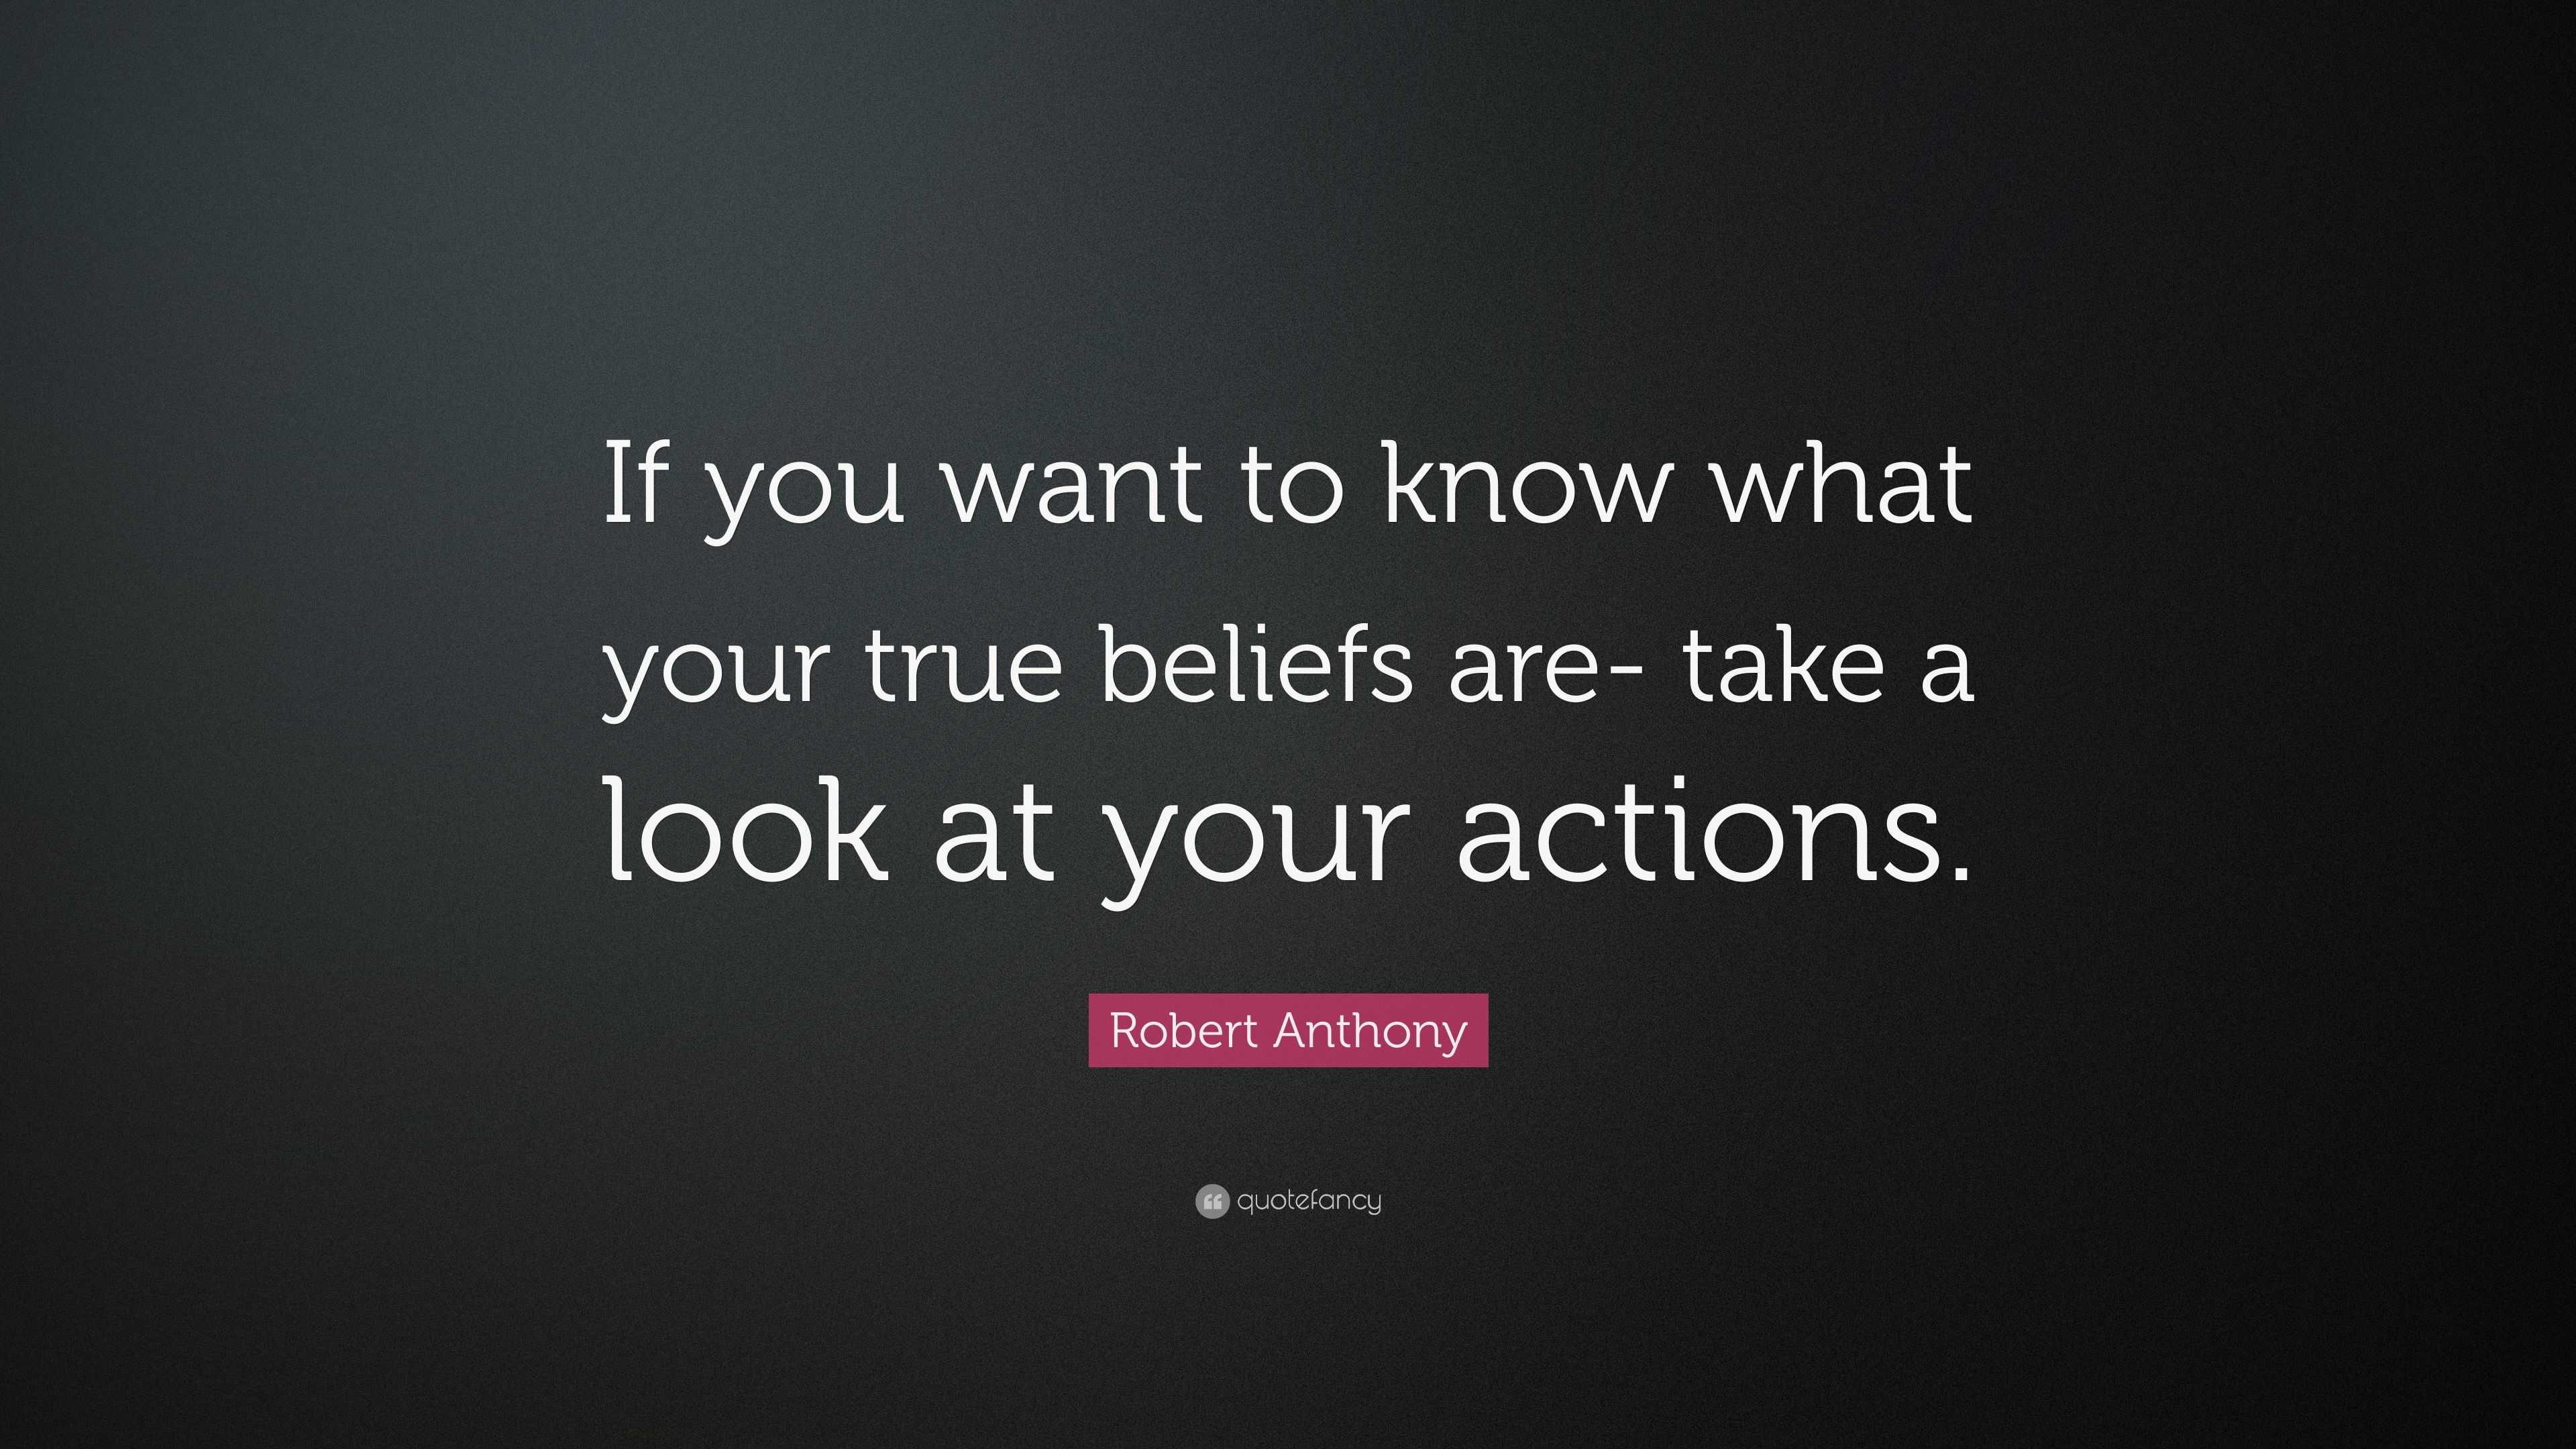 Robert Anthony Quote: “If you want to know what your true beliefs are ...